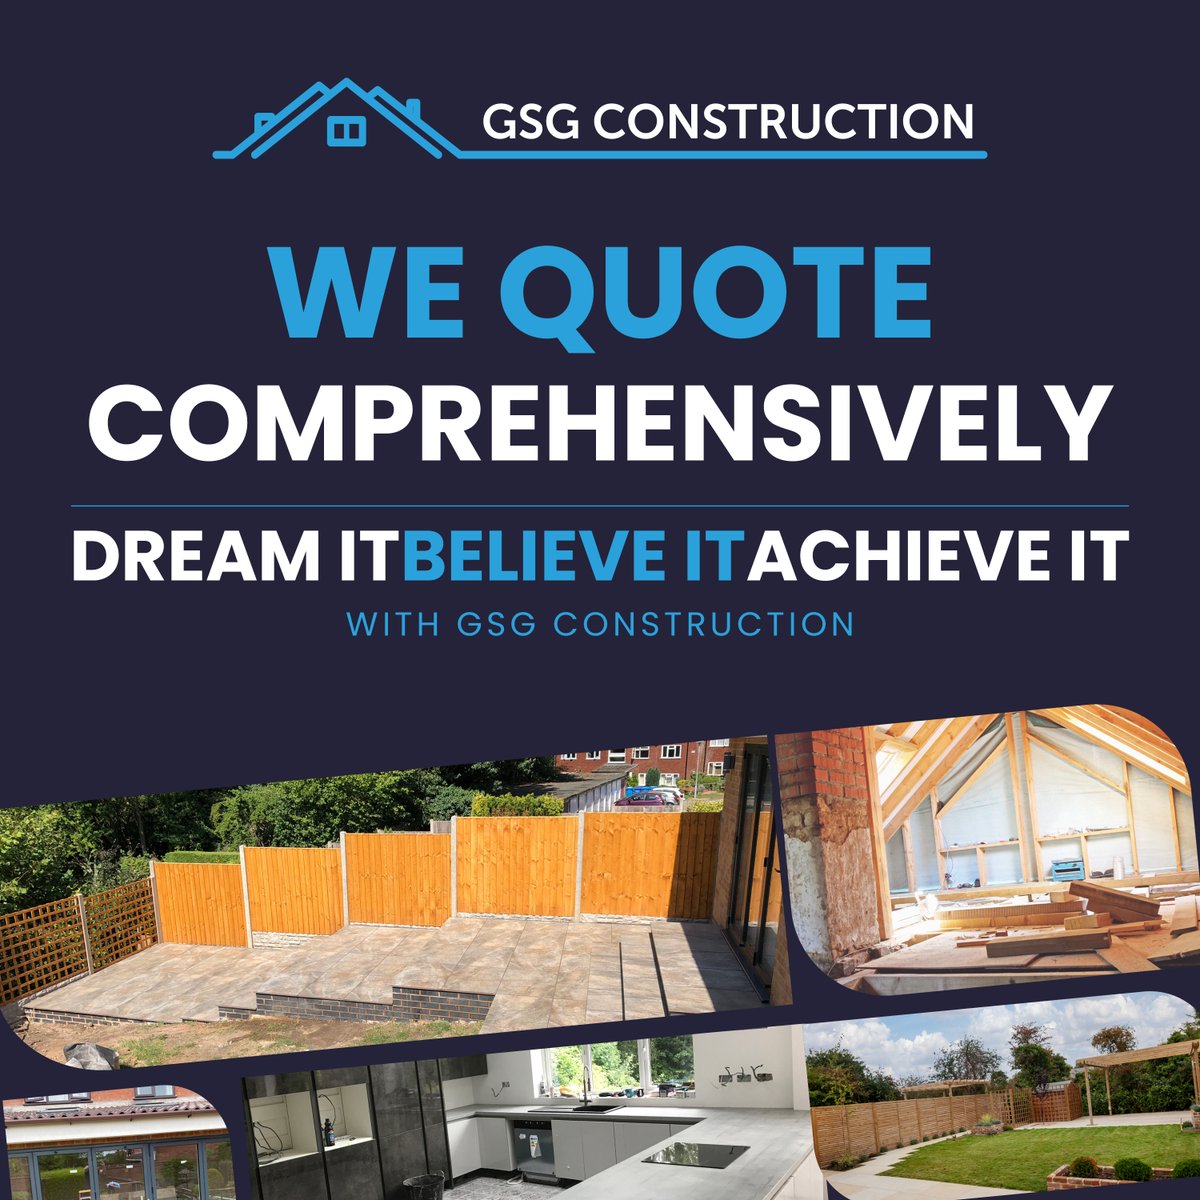 At GSG we quote comprehensively on every job so you know exactly what you are paying for and when payment will be expected.

For any projects contact us
☎️ 0121 244 6383 ✉️ sales@gsgconstruction.co.uk
#houseextensions #loftconversions #buildingandconstruction #extensions